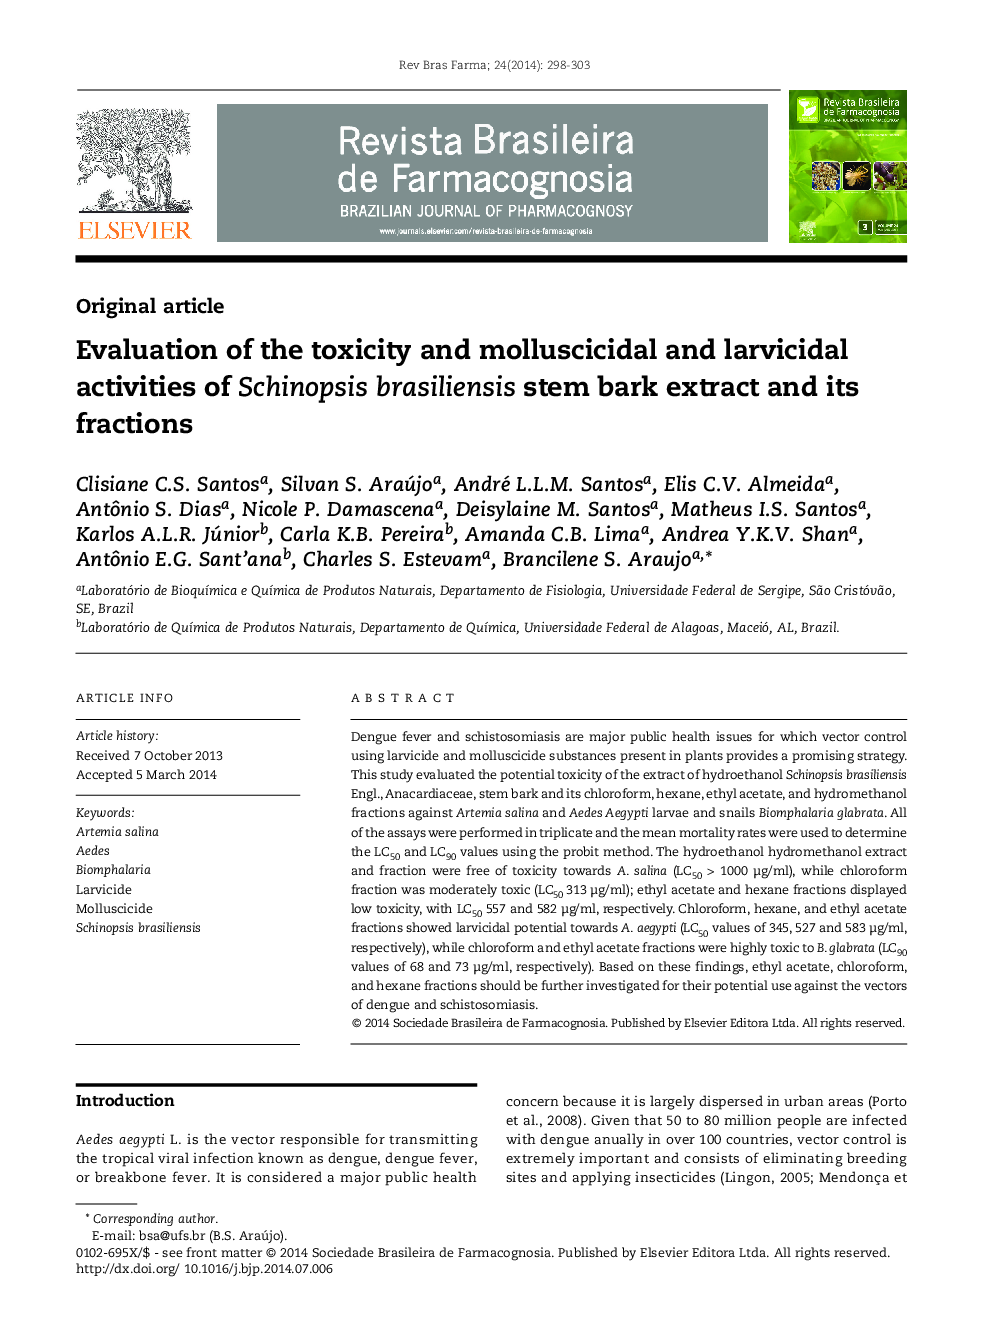 Evaluation of the toxicity and molluscicidal and larvicidal activities of Schinopsis brasiliensis stem bark extract and its fractions